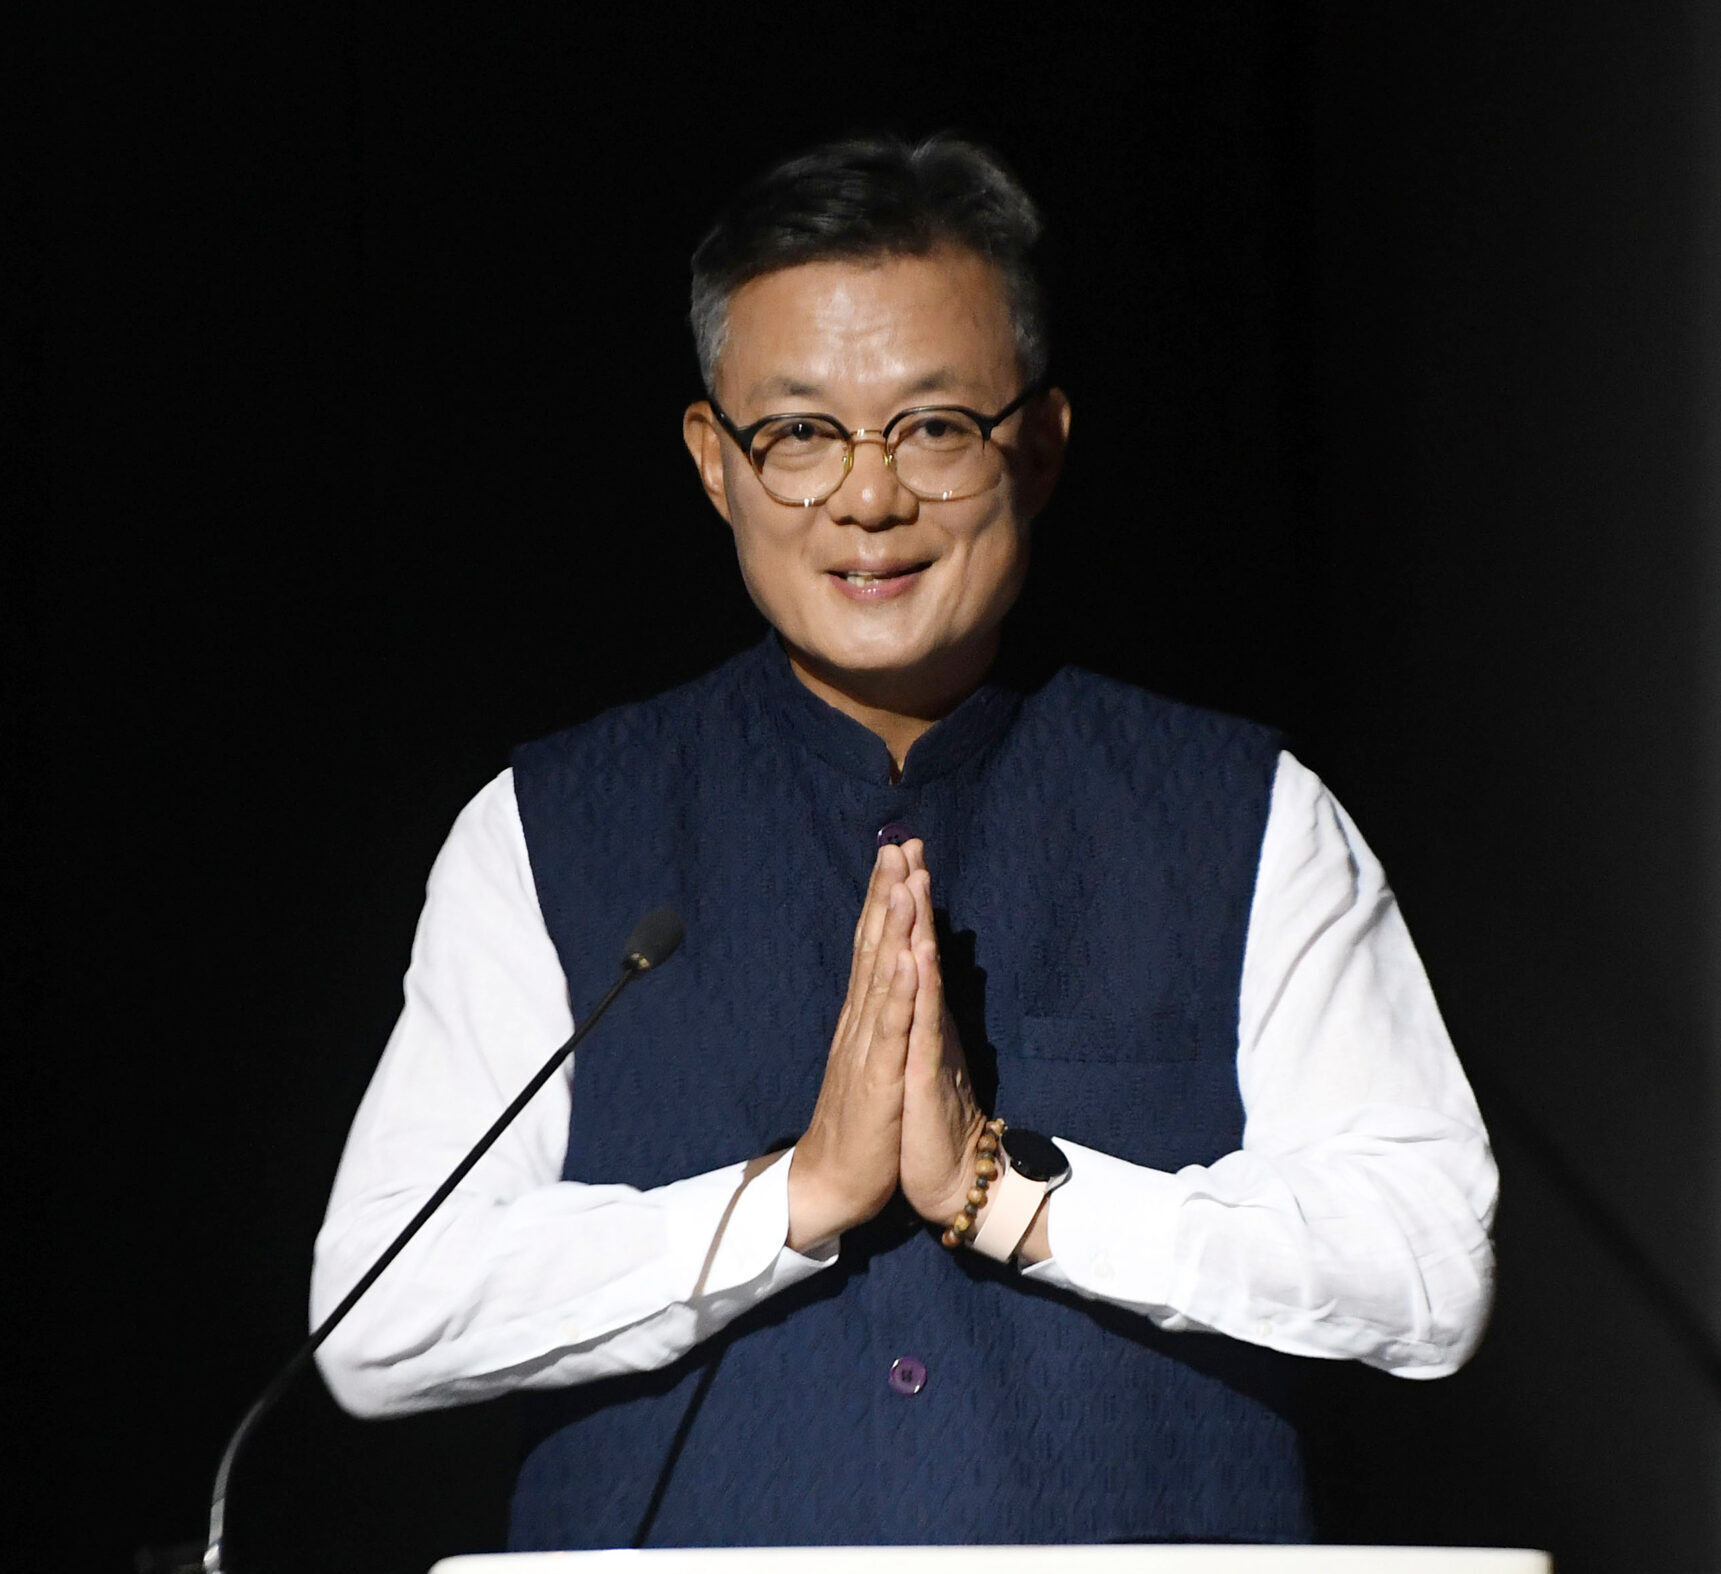 Ayodhya very important for us historically, says South Korean envoy